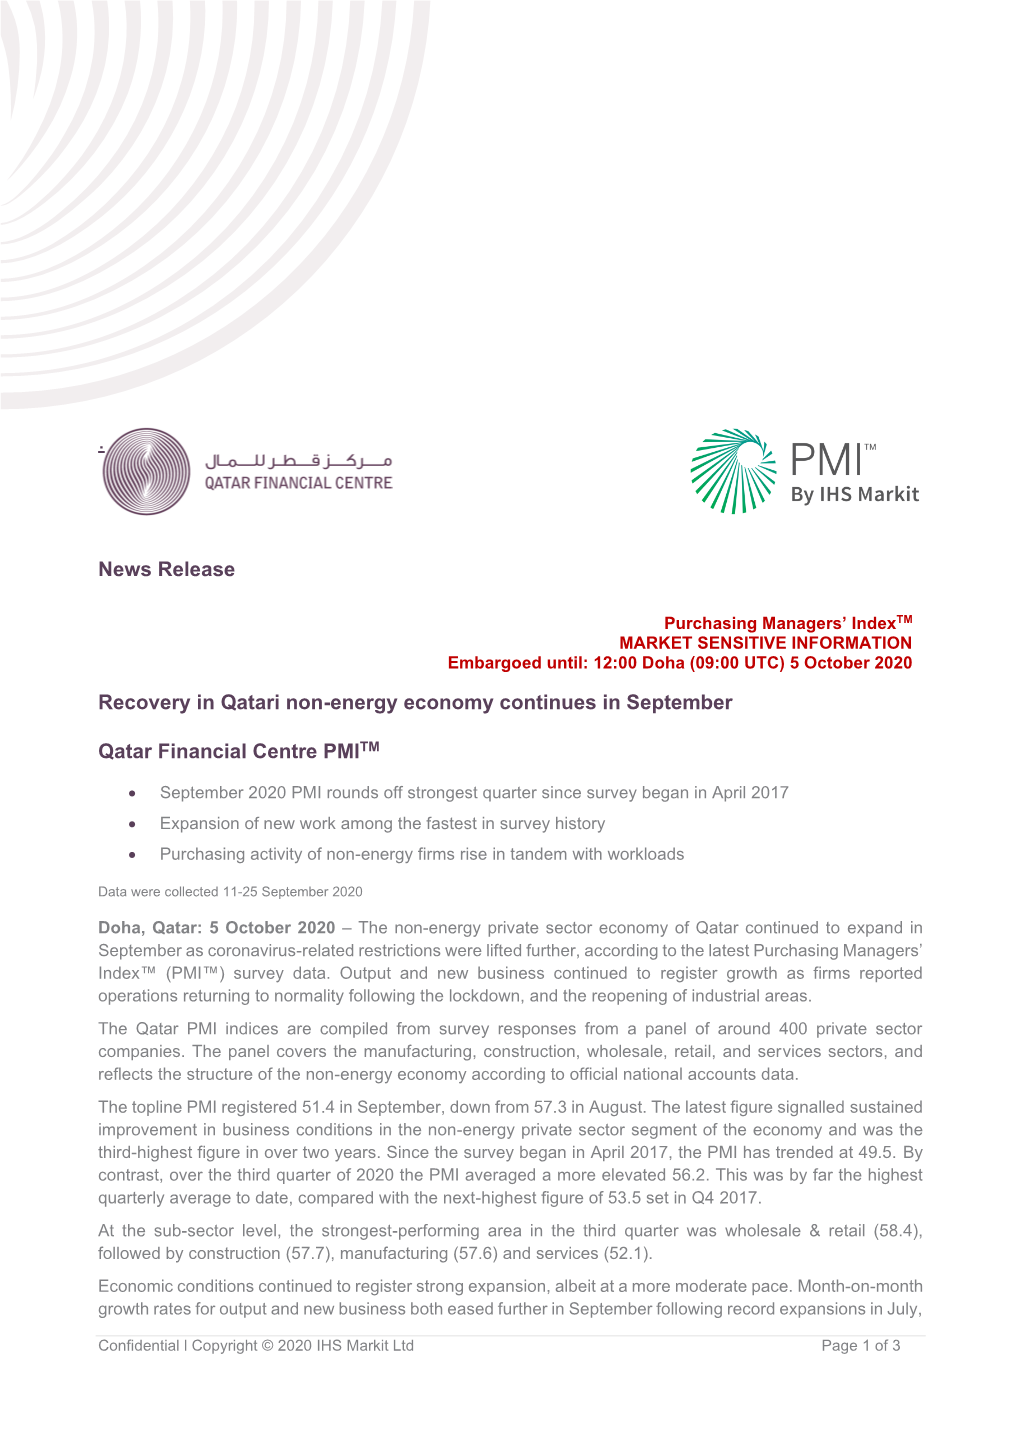 News Release Recovery in Qatari Non-Energy Economy Continues In